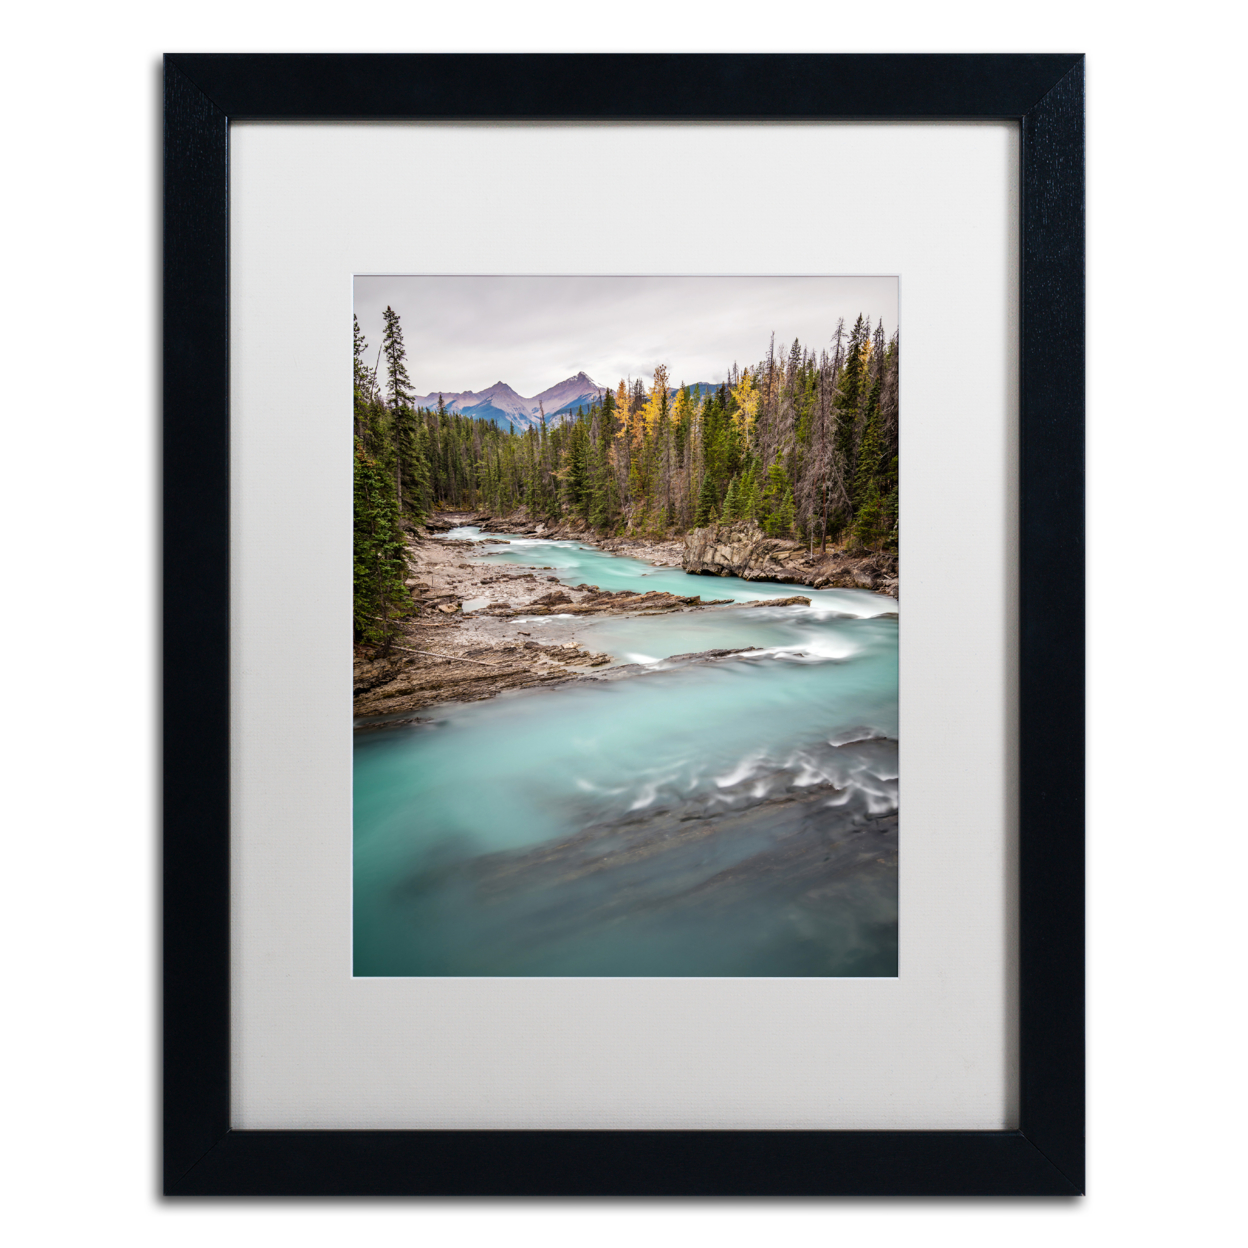 Pierre Leclerc 'Kicking Horse River' Black Wooden Framed Art 18 X 22 Inches